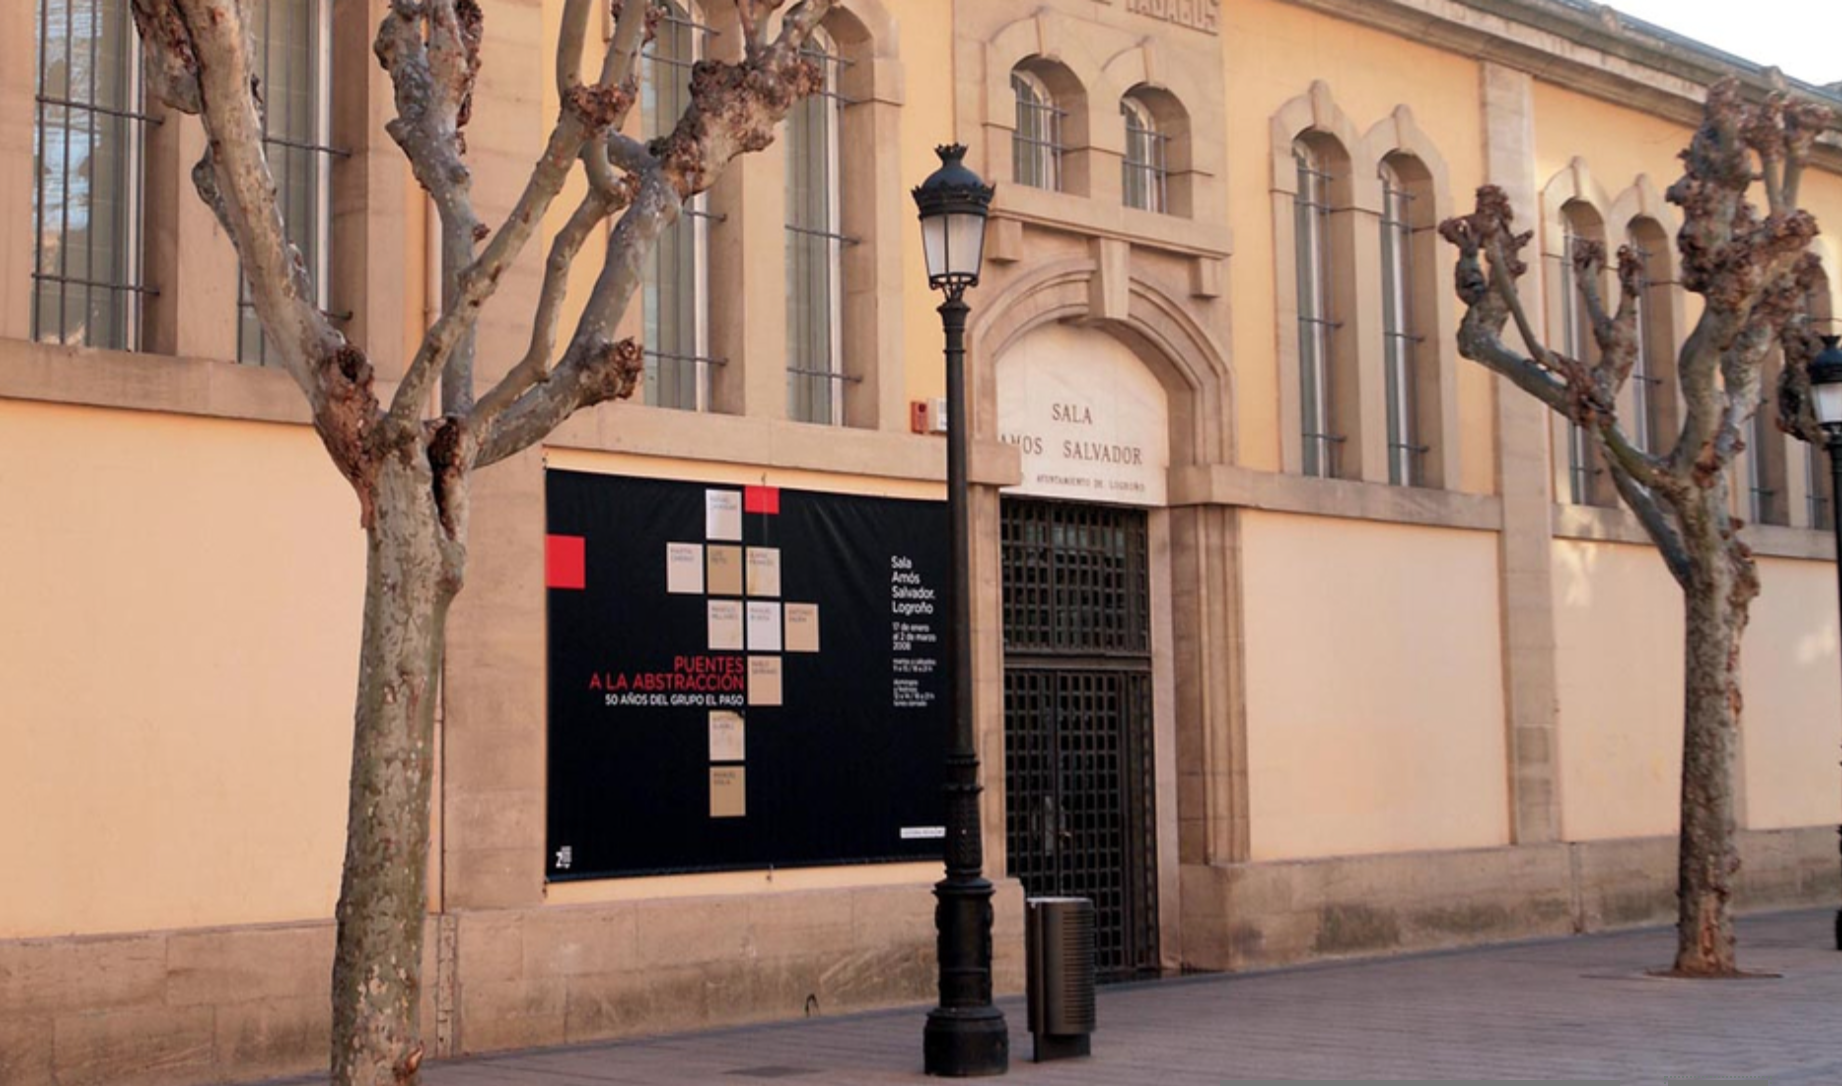 12/06/2021 - Carlos Aires’s works on view in Sala Amos Salvador museum in Logroño, Spain